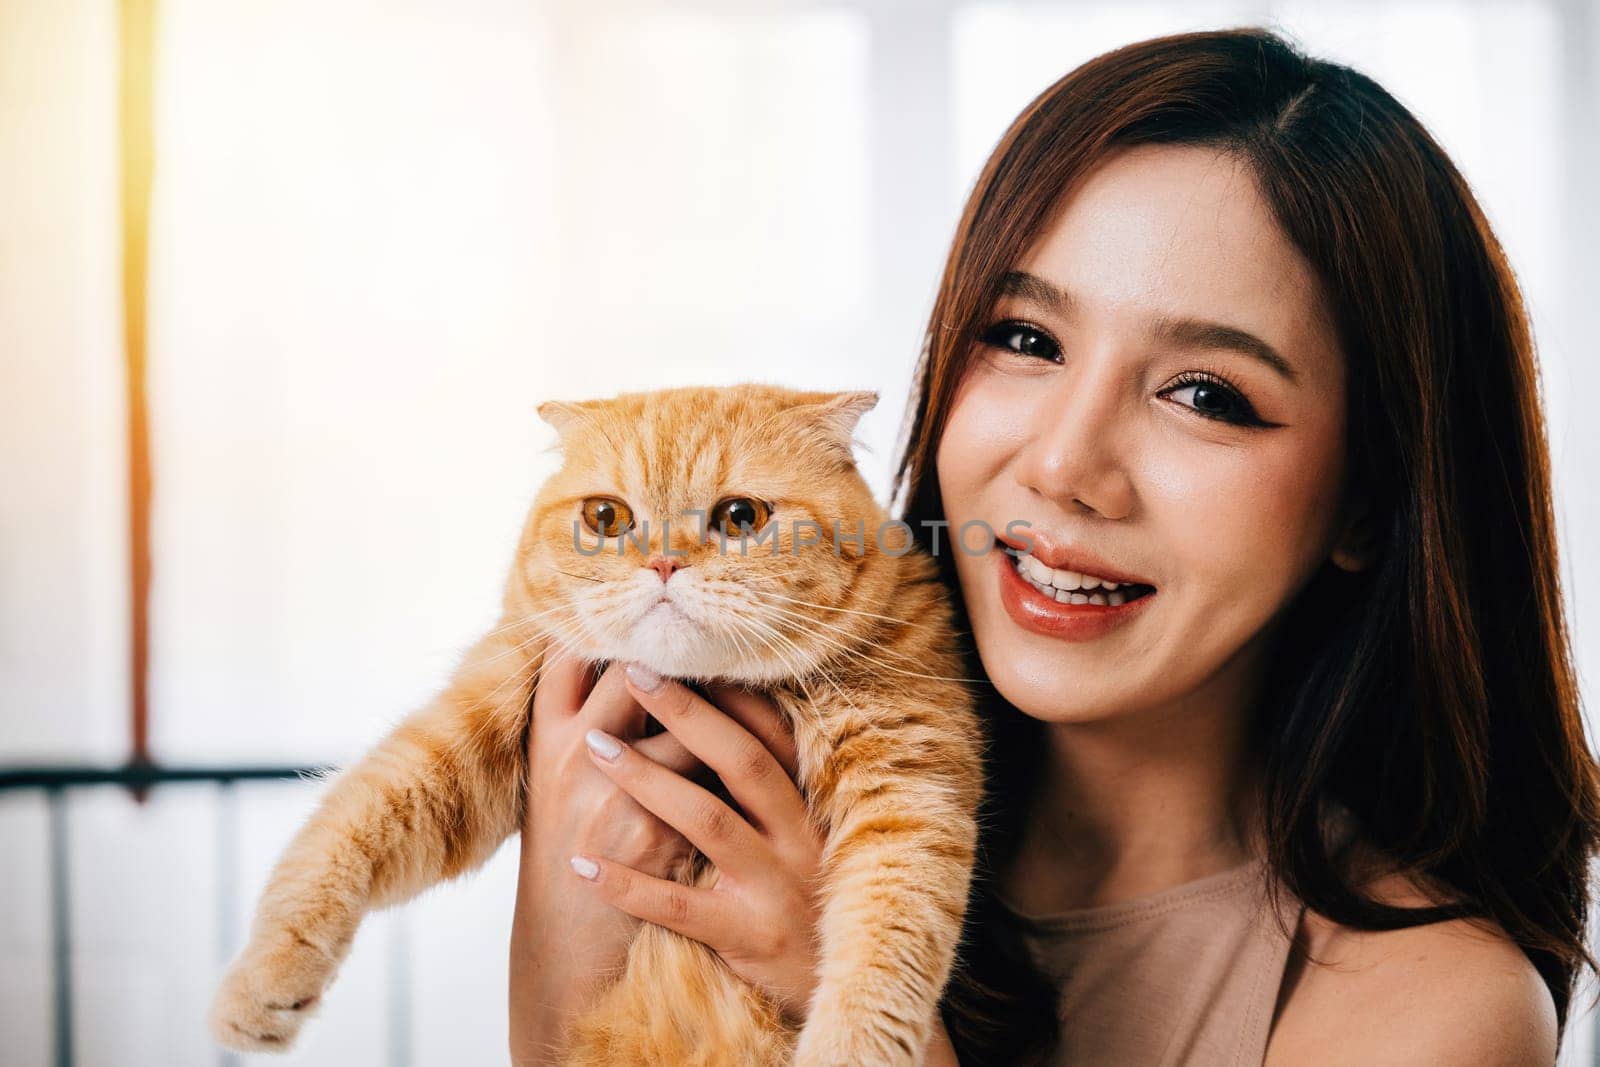 This close-up shot portrays a woman and her charming orange Scottish Fold cat, highlighting the warmth and companionship they enjoy in the comfort of their home.